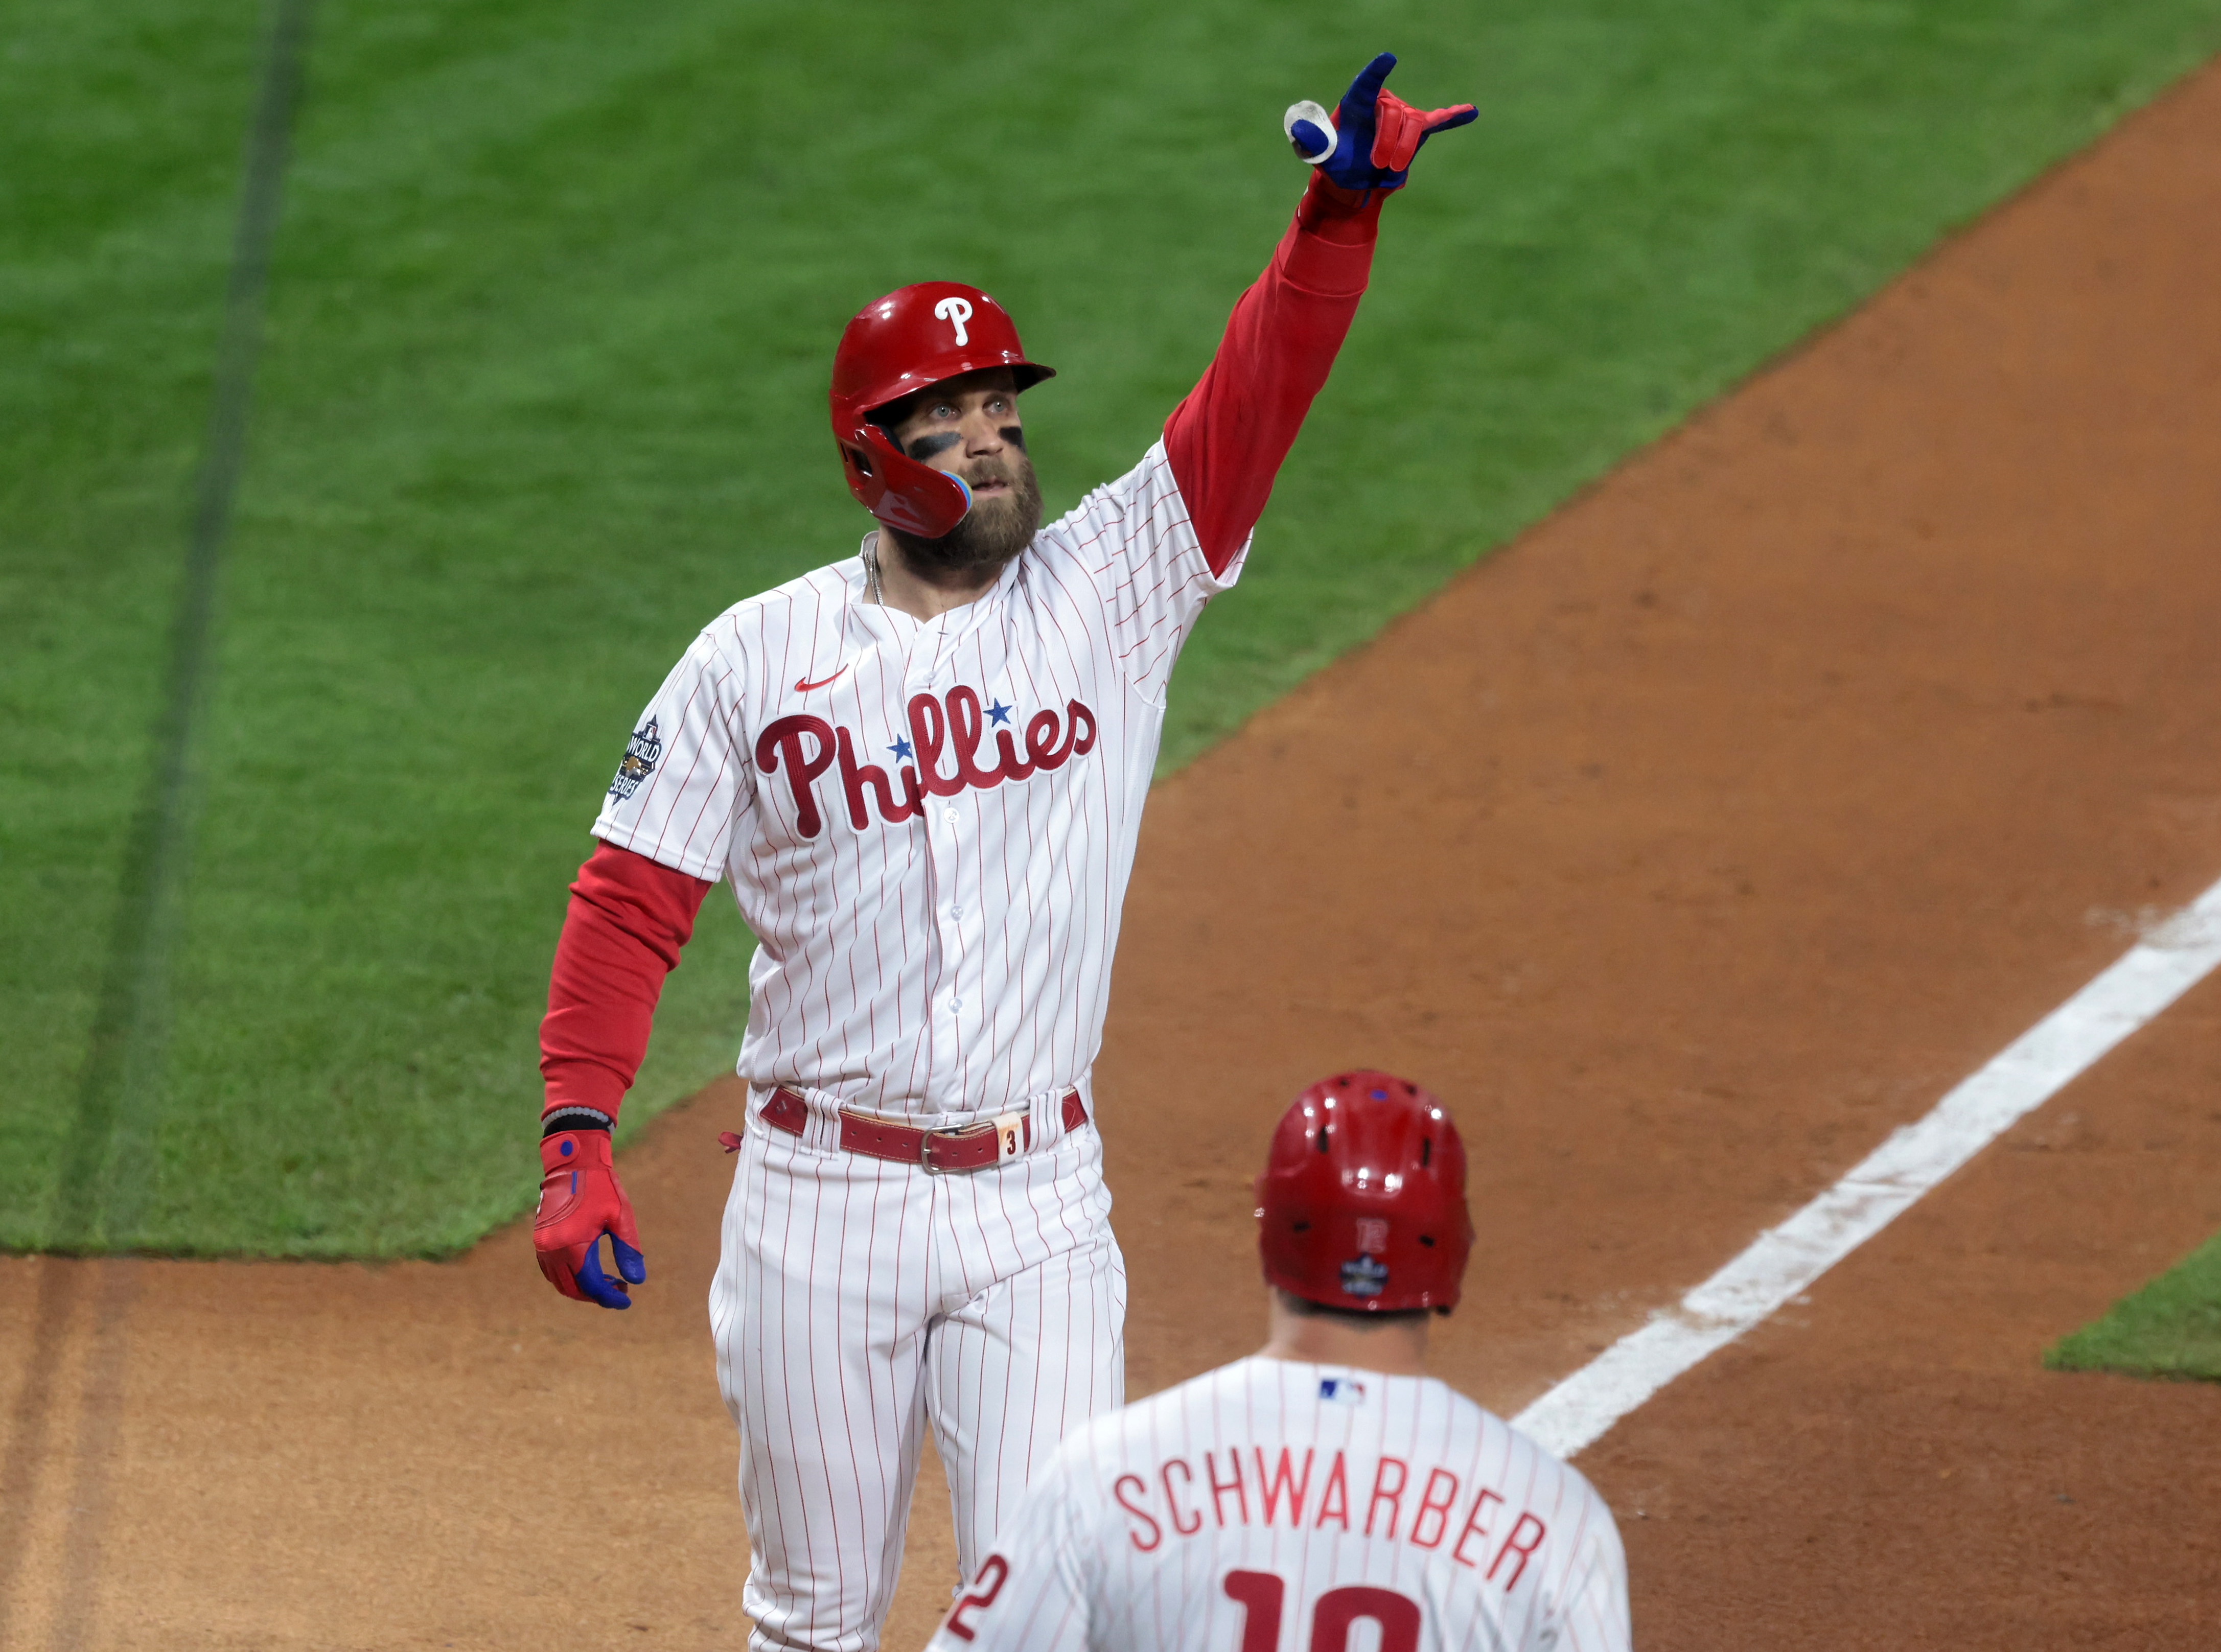 Bryce Harper (3) of the Philadelphia Phillies celebrates his two-run home run in the first inning vs. the Houston Astros during Game 3 of the World Series at Citizens Bank Park, Tuesday, Nov. 1 2022.